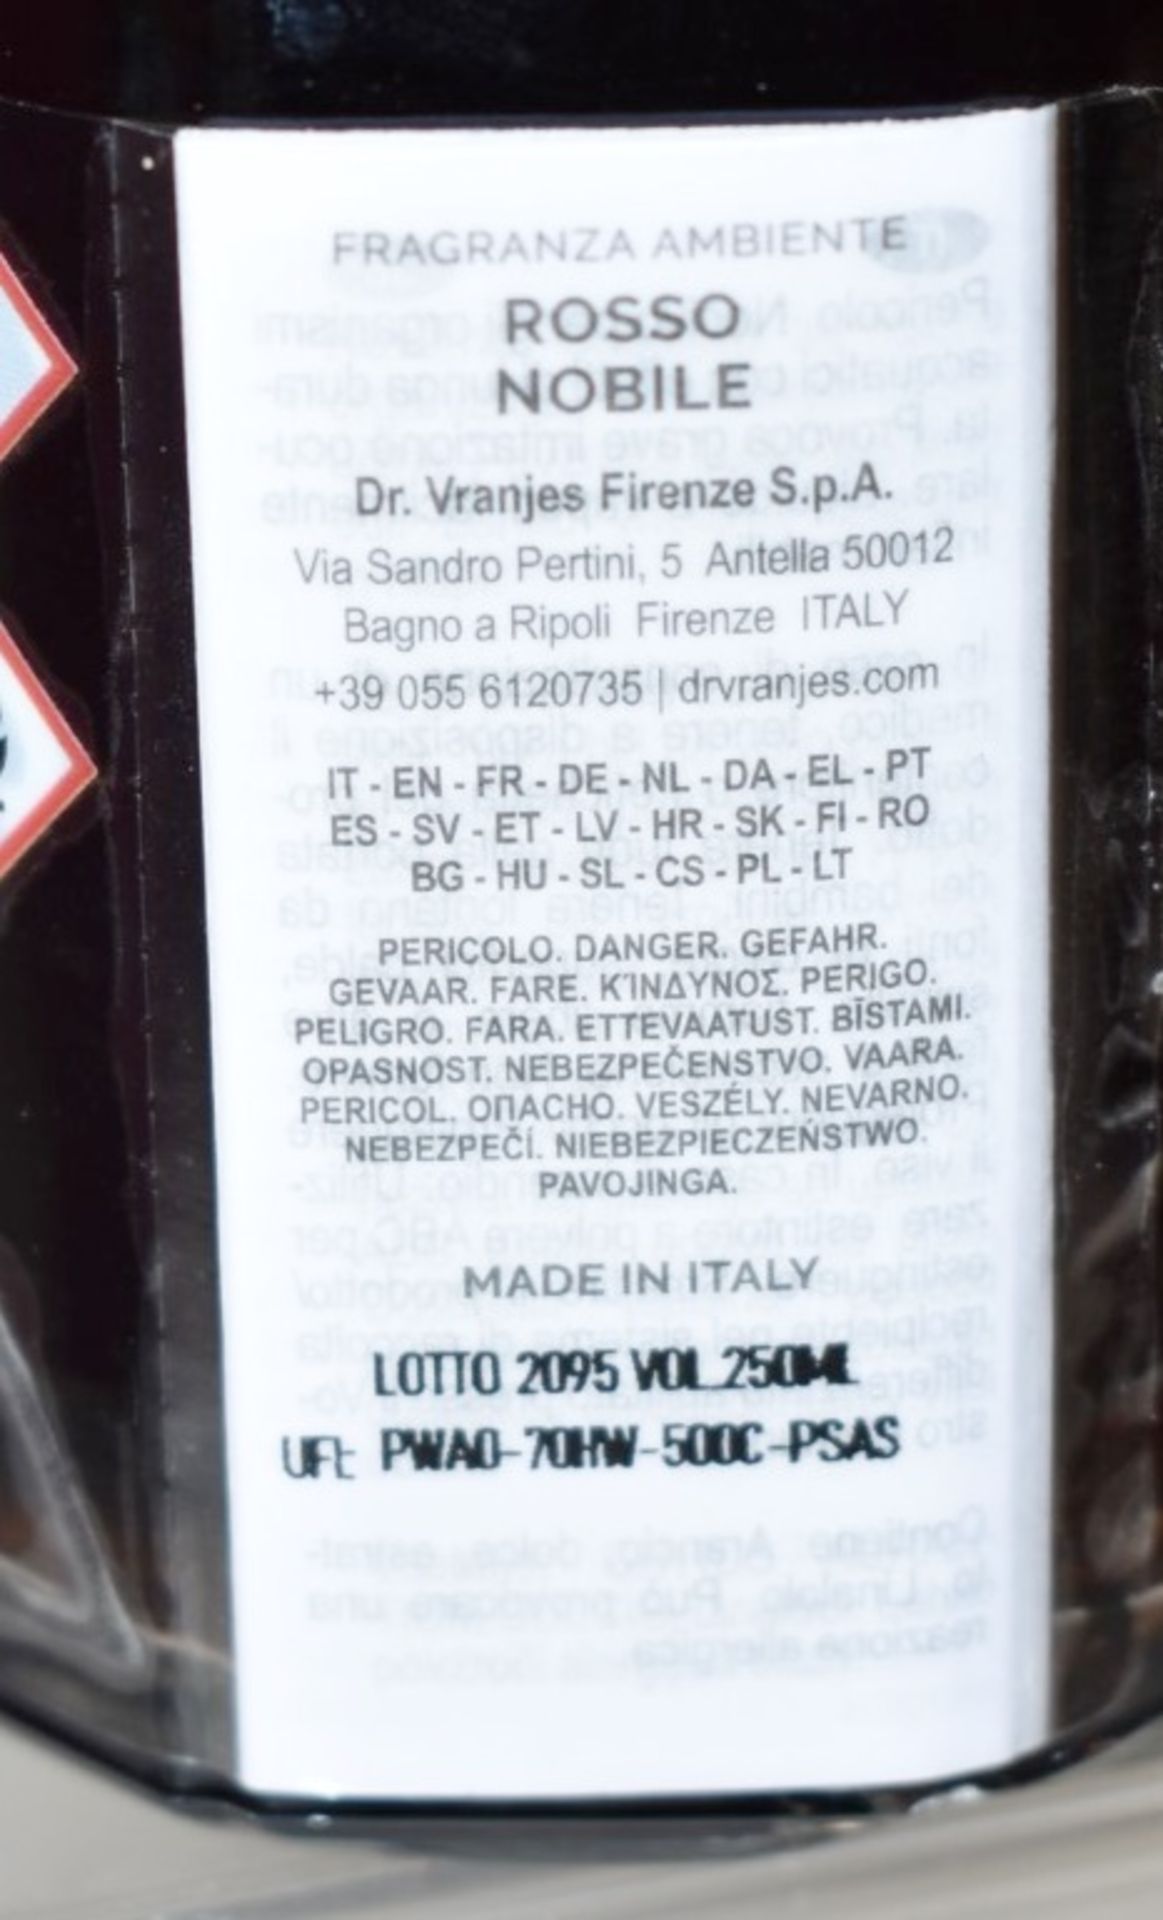 1 x DR. VRANJES FIRENZE 250ml Rosso Nobile Fragrance with Gift Box - Image 4 of 6